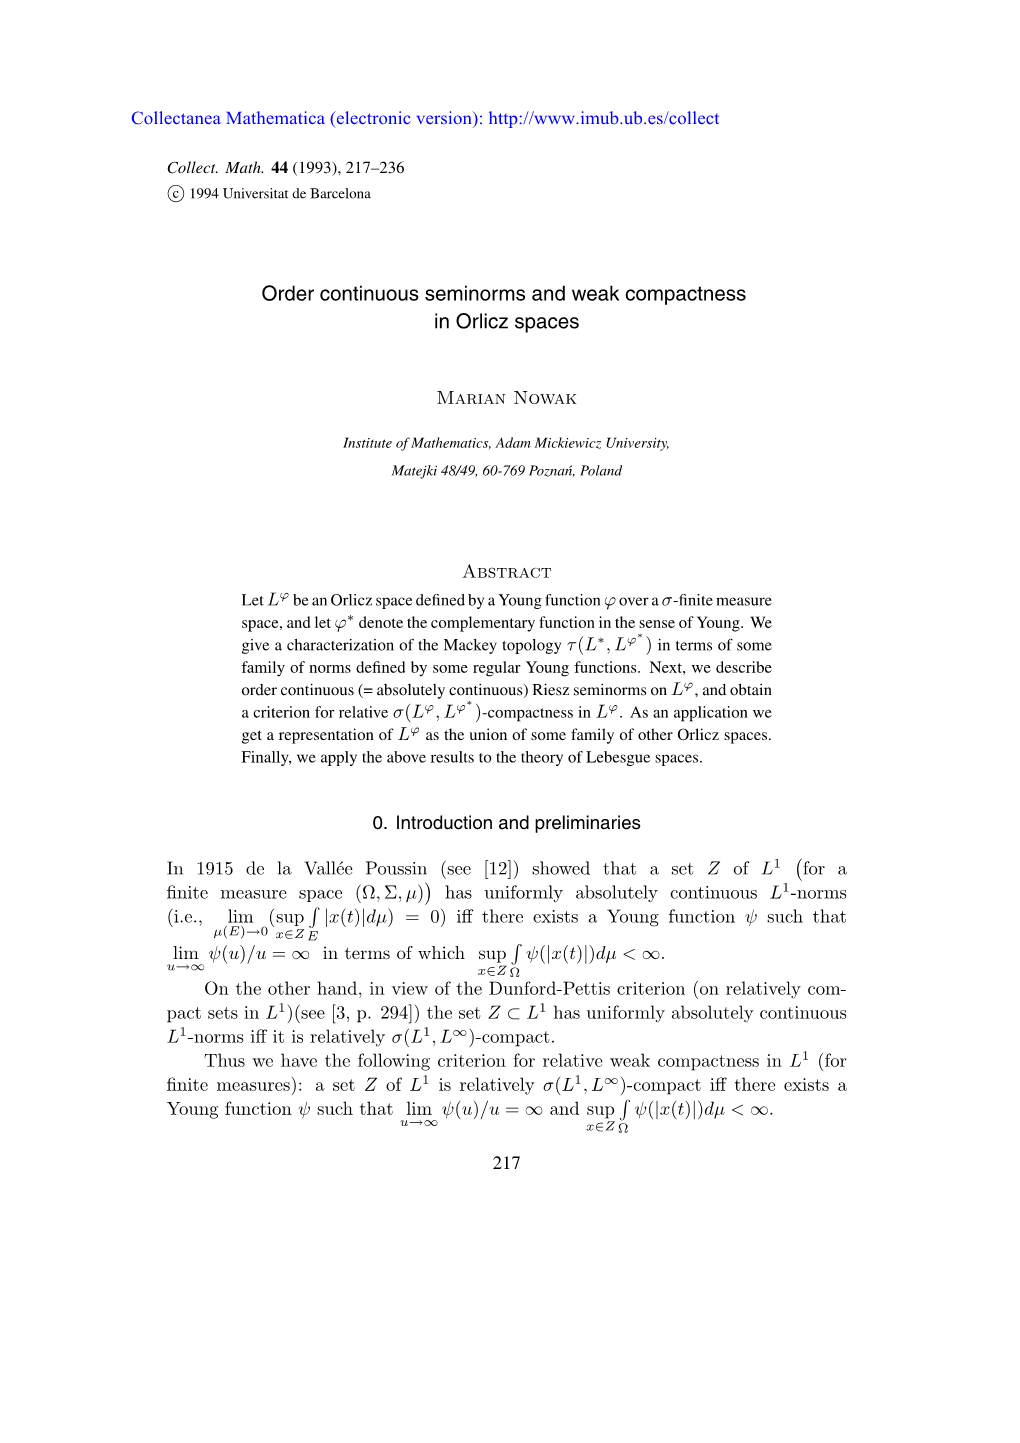 Order Continuous Seminorms and Weak Compactness in Orlicz Spaces